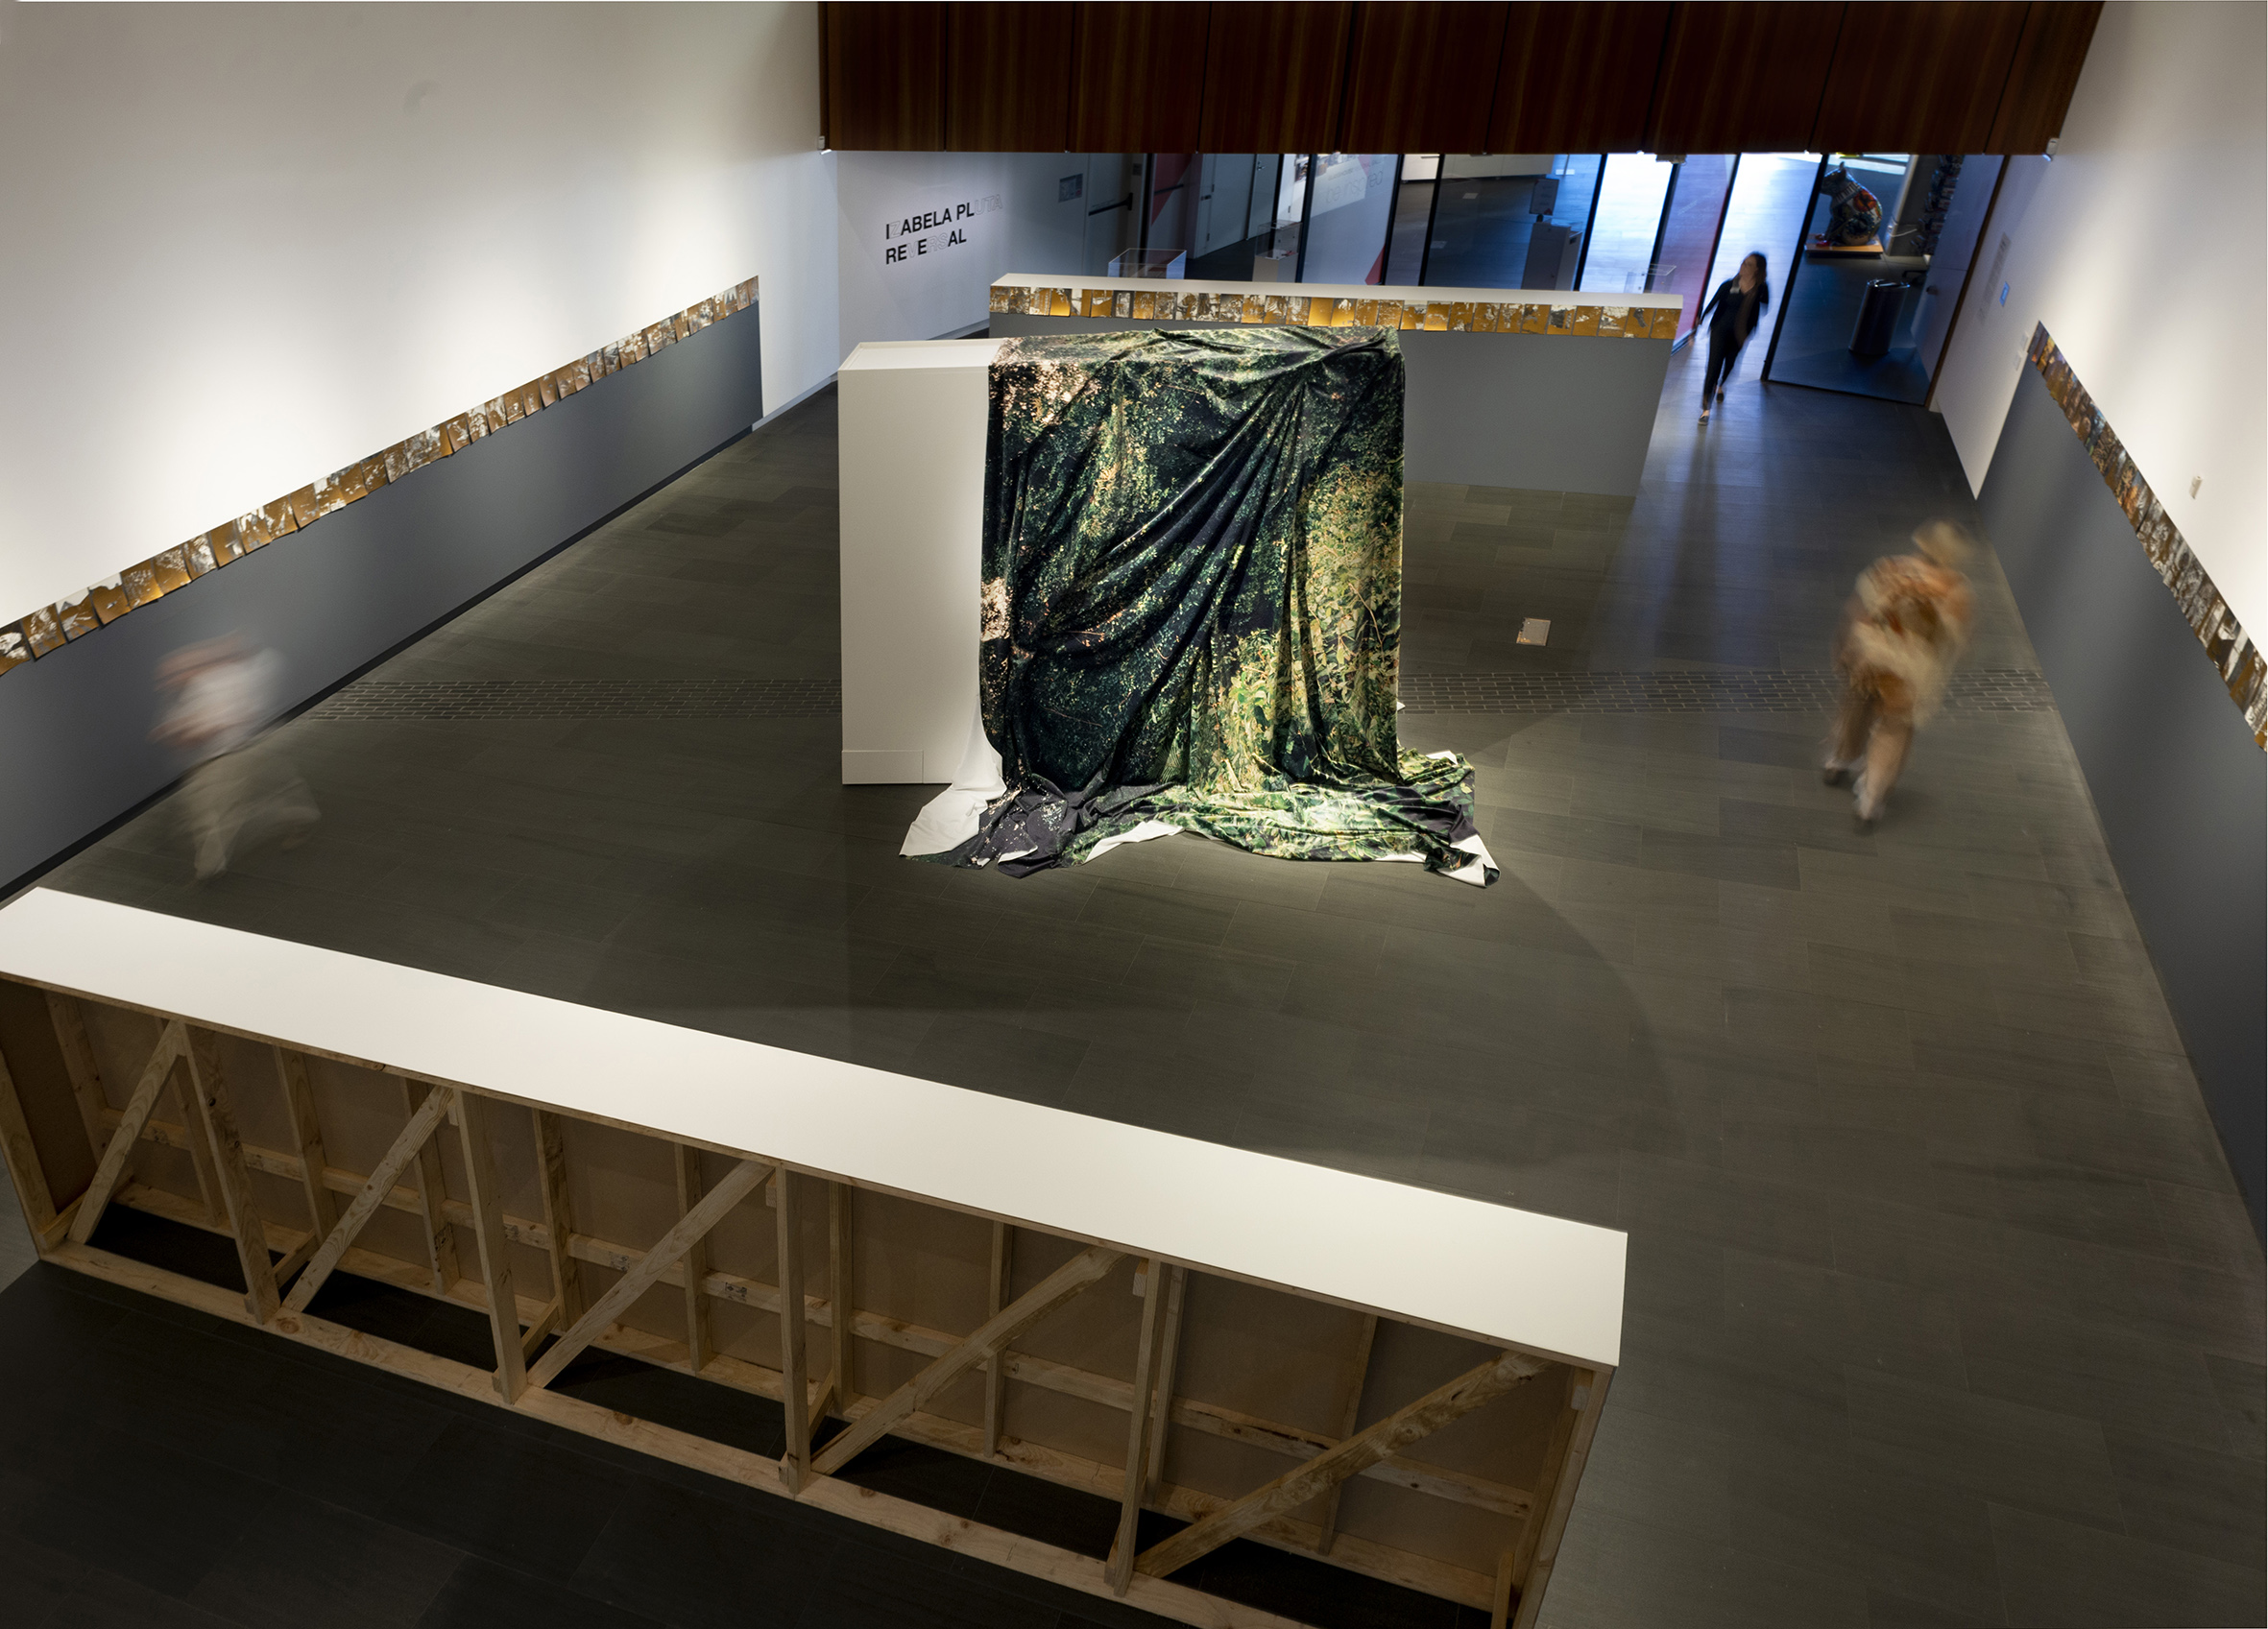    Reversal   2019   dye-sublimation print on fabric 560 x 800 cm    After the pleasure of ruins   2015–2019  153 unique photo silk screen prints on found book pages 18.7 x 25.4 cm each 